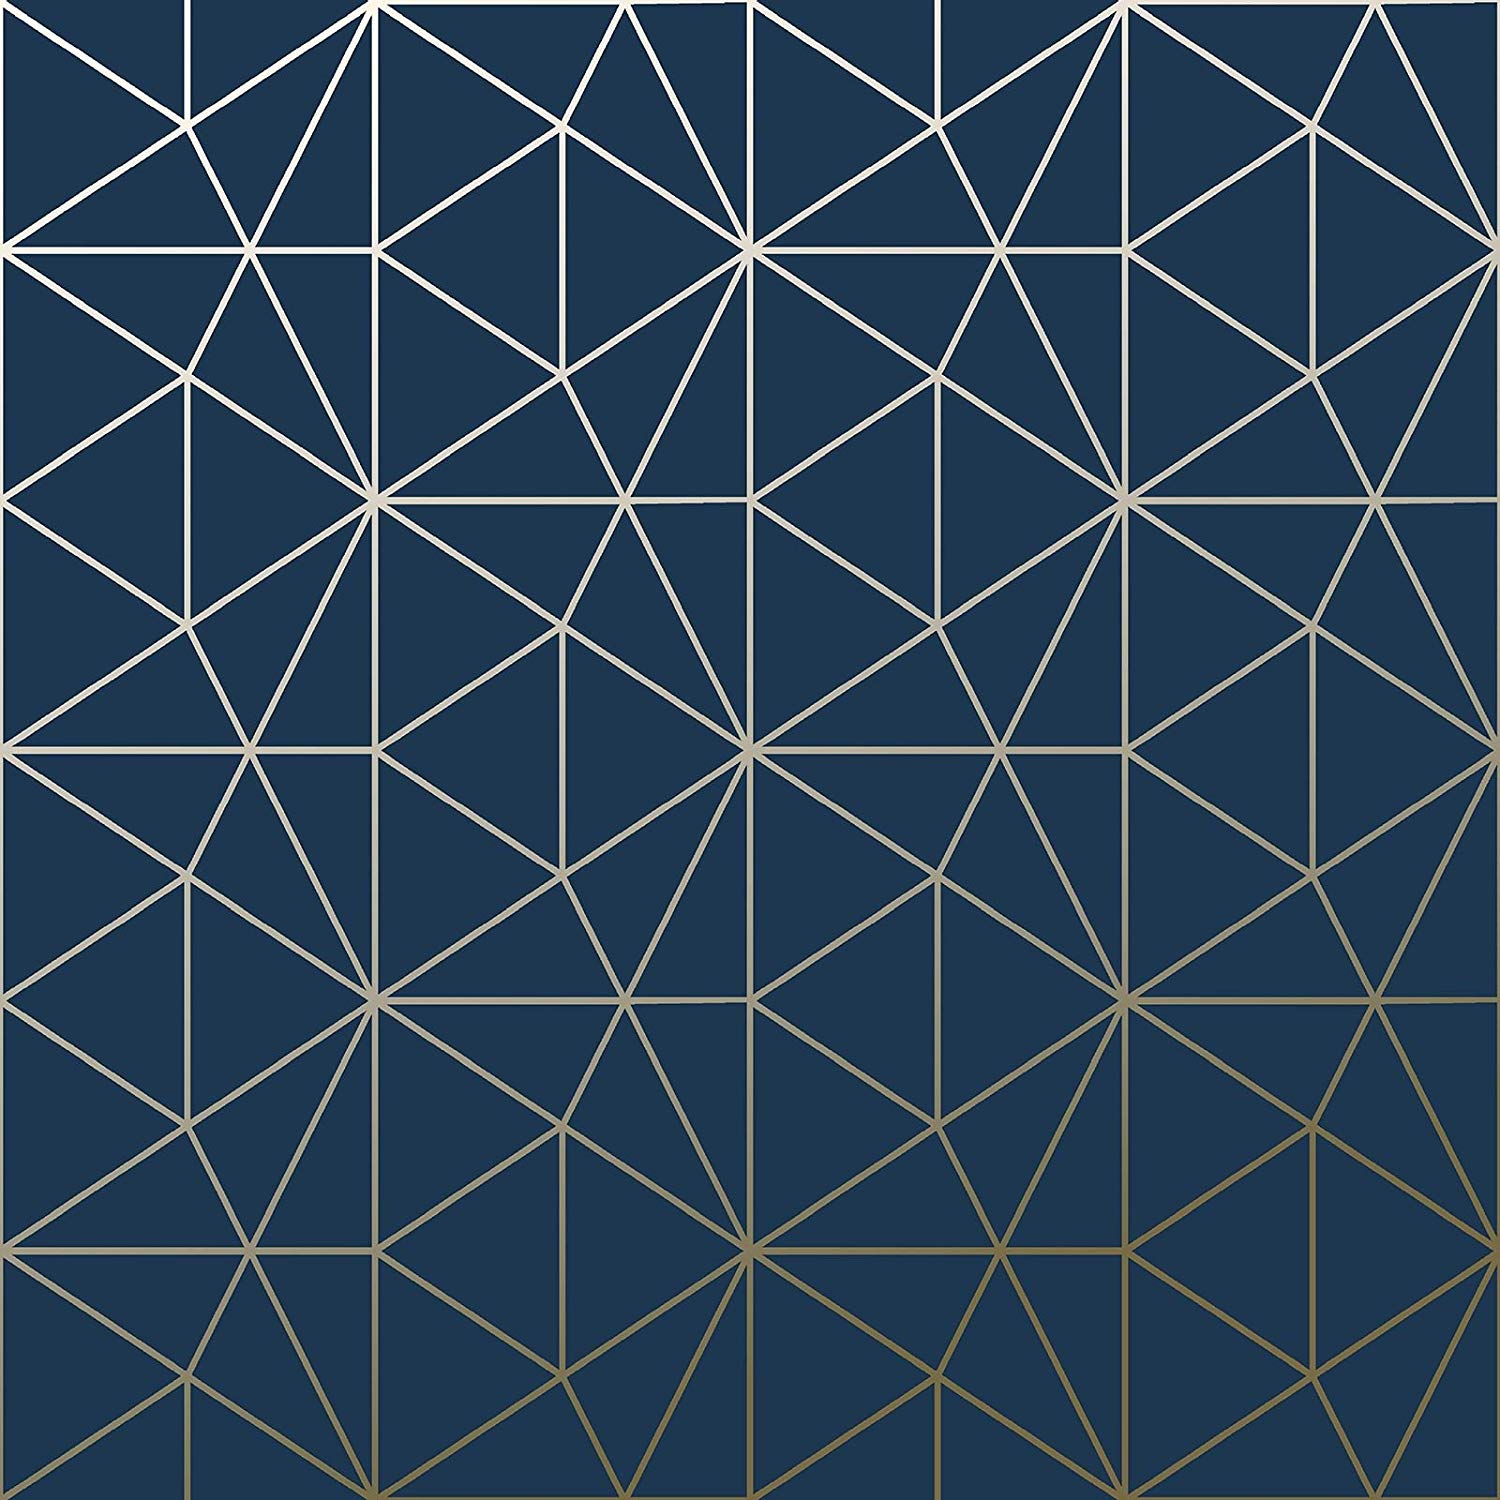 Metro Prism Geometric Triangle Wallpaper Navy Blue And Gold